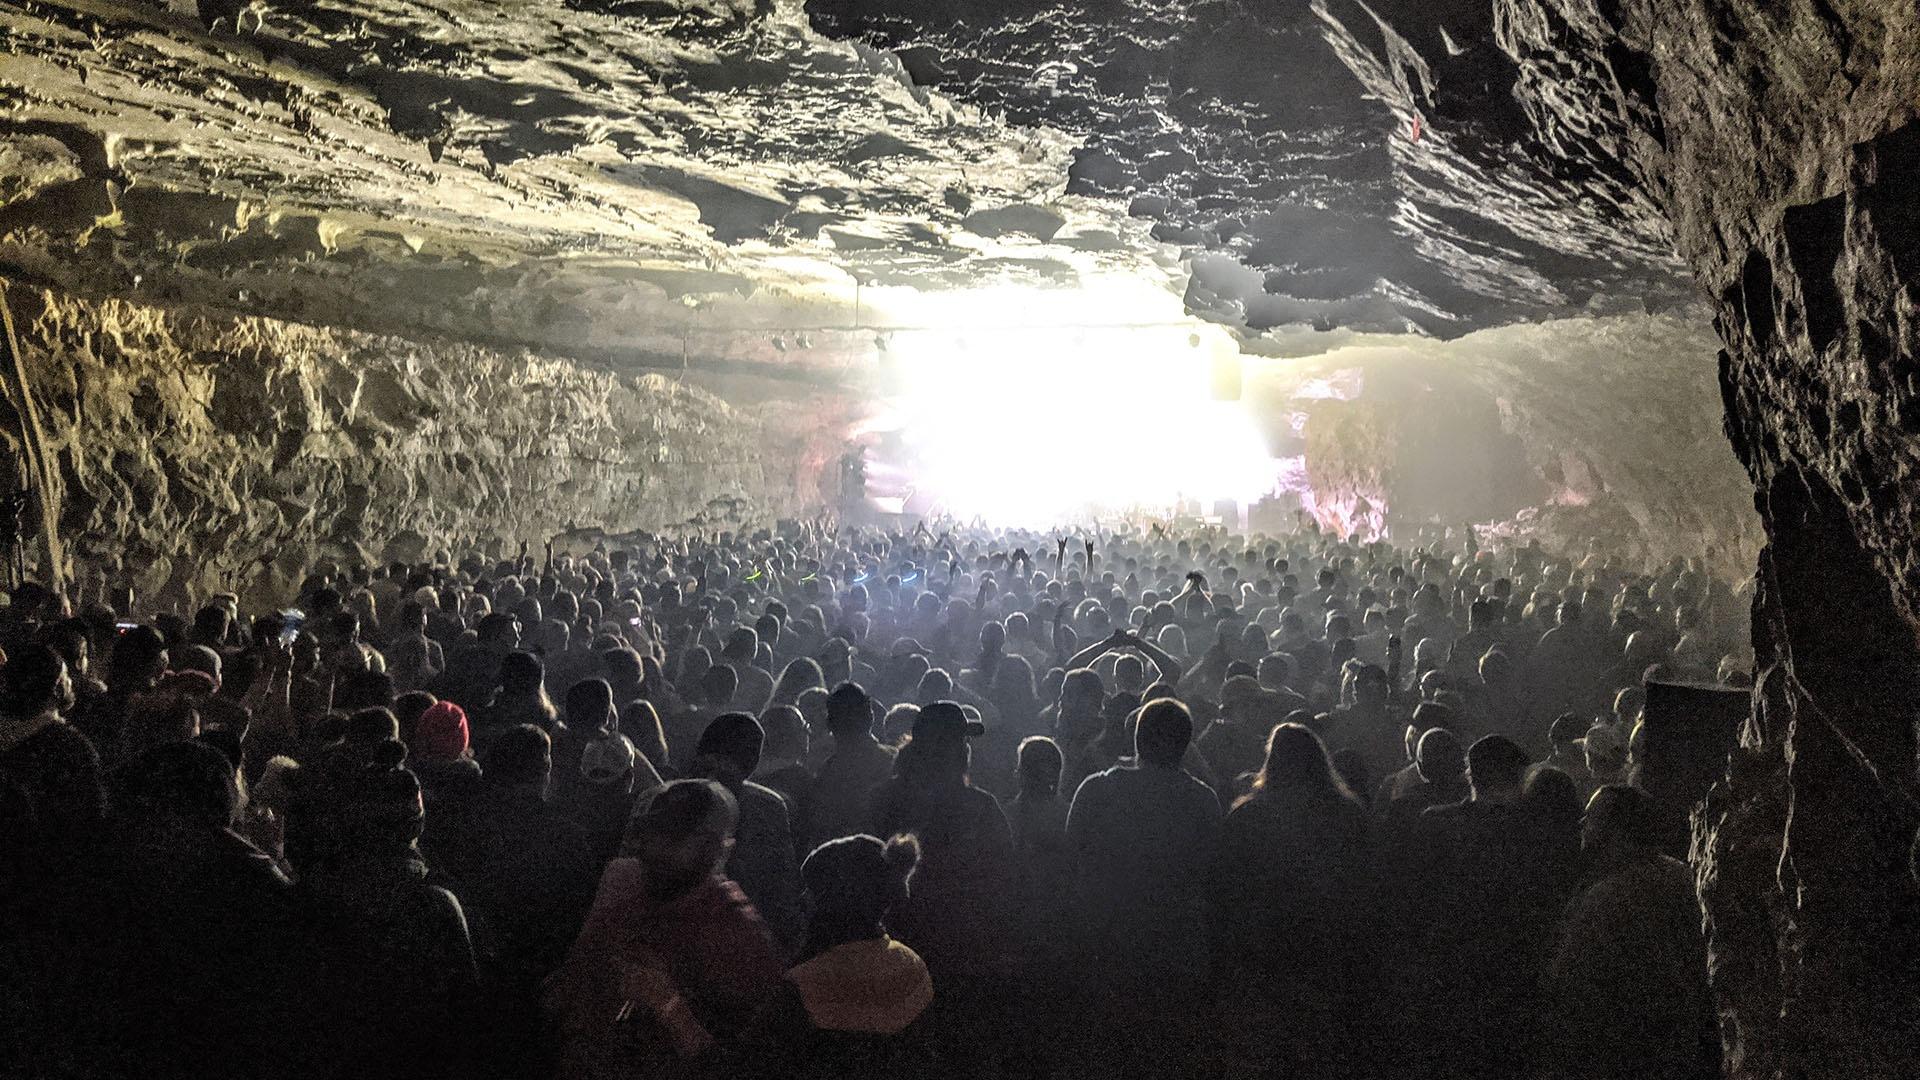 Fans standing in The Caverns during a "Bluegrass Underground" show.